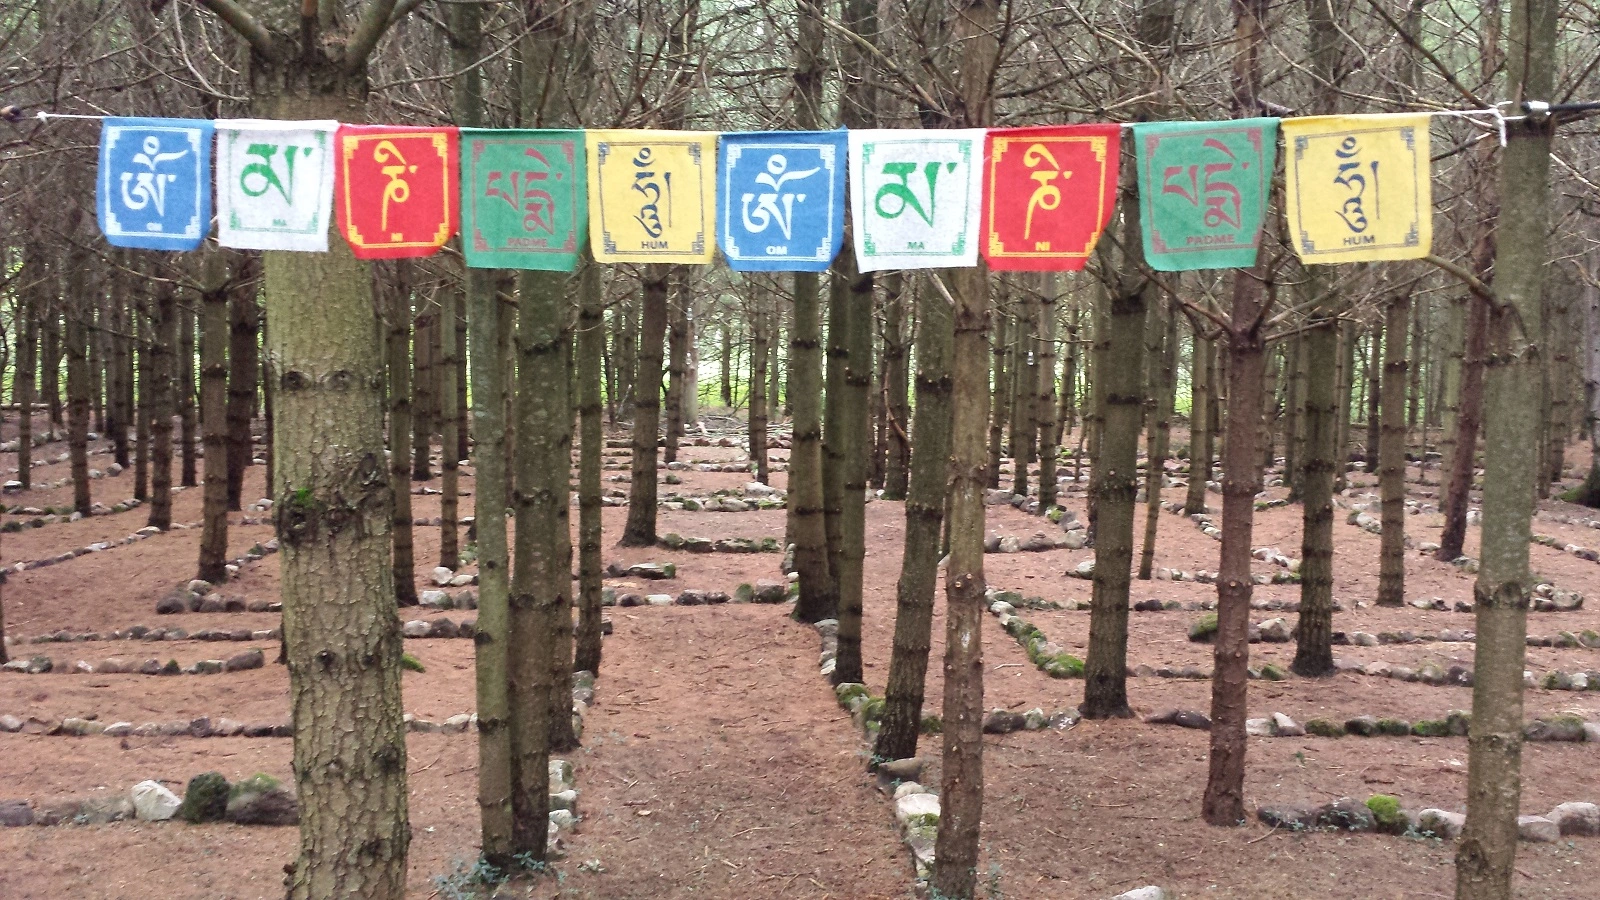 Entering the labyrinth, the mantra OM MANI PADME HUM